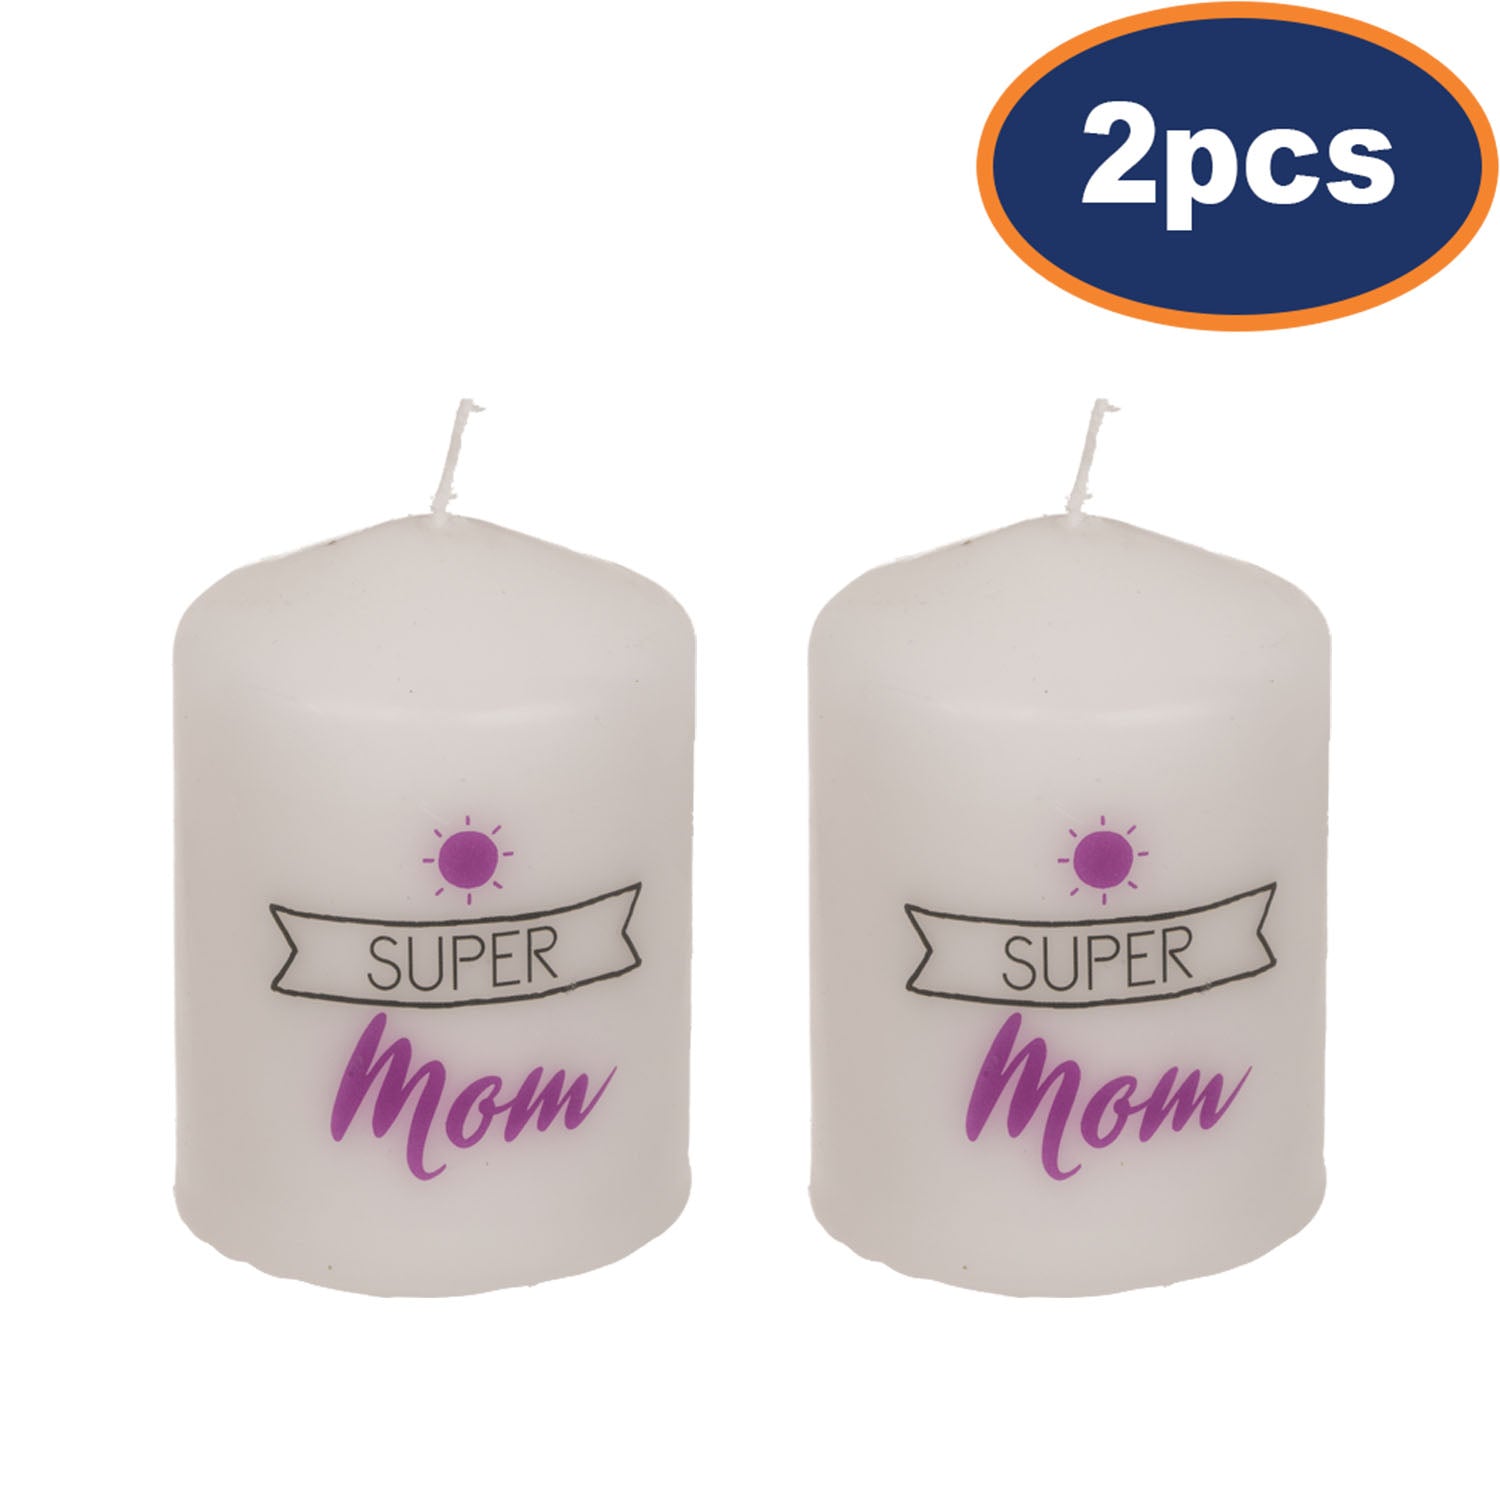 2Pcs White Super Mom Unscented Pillar Candle